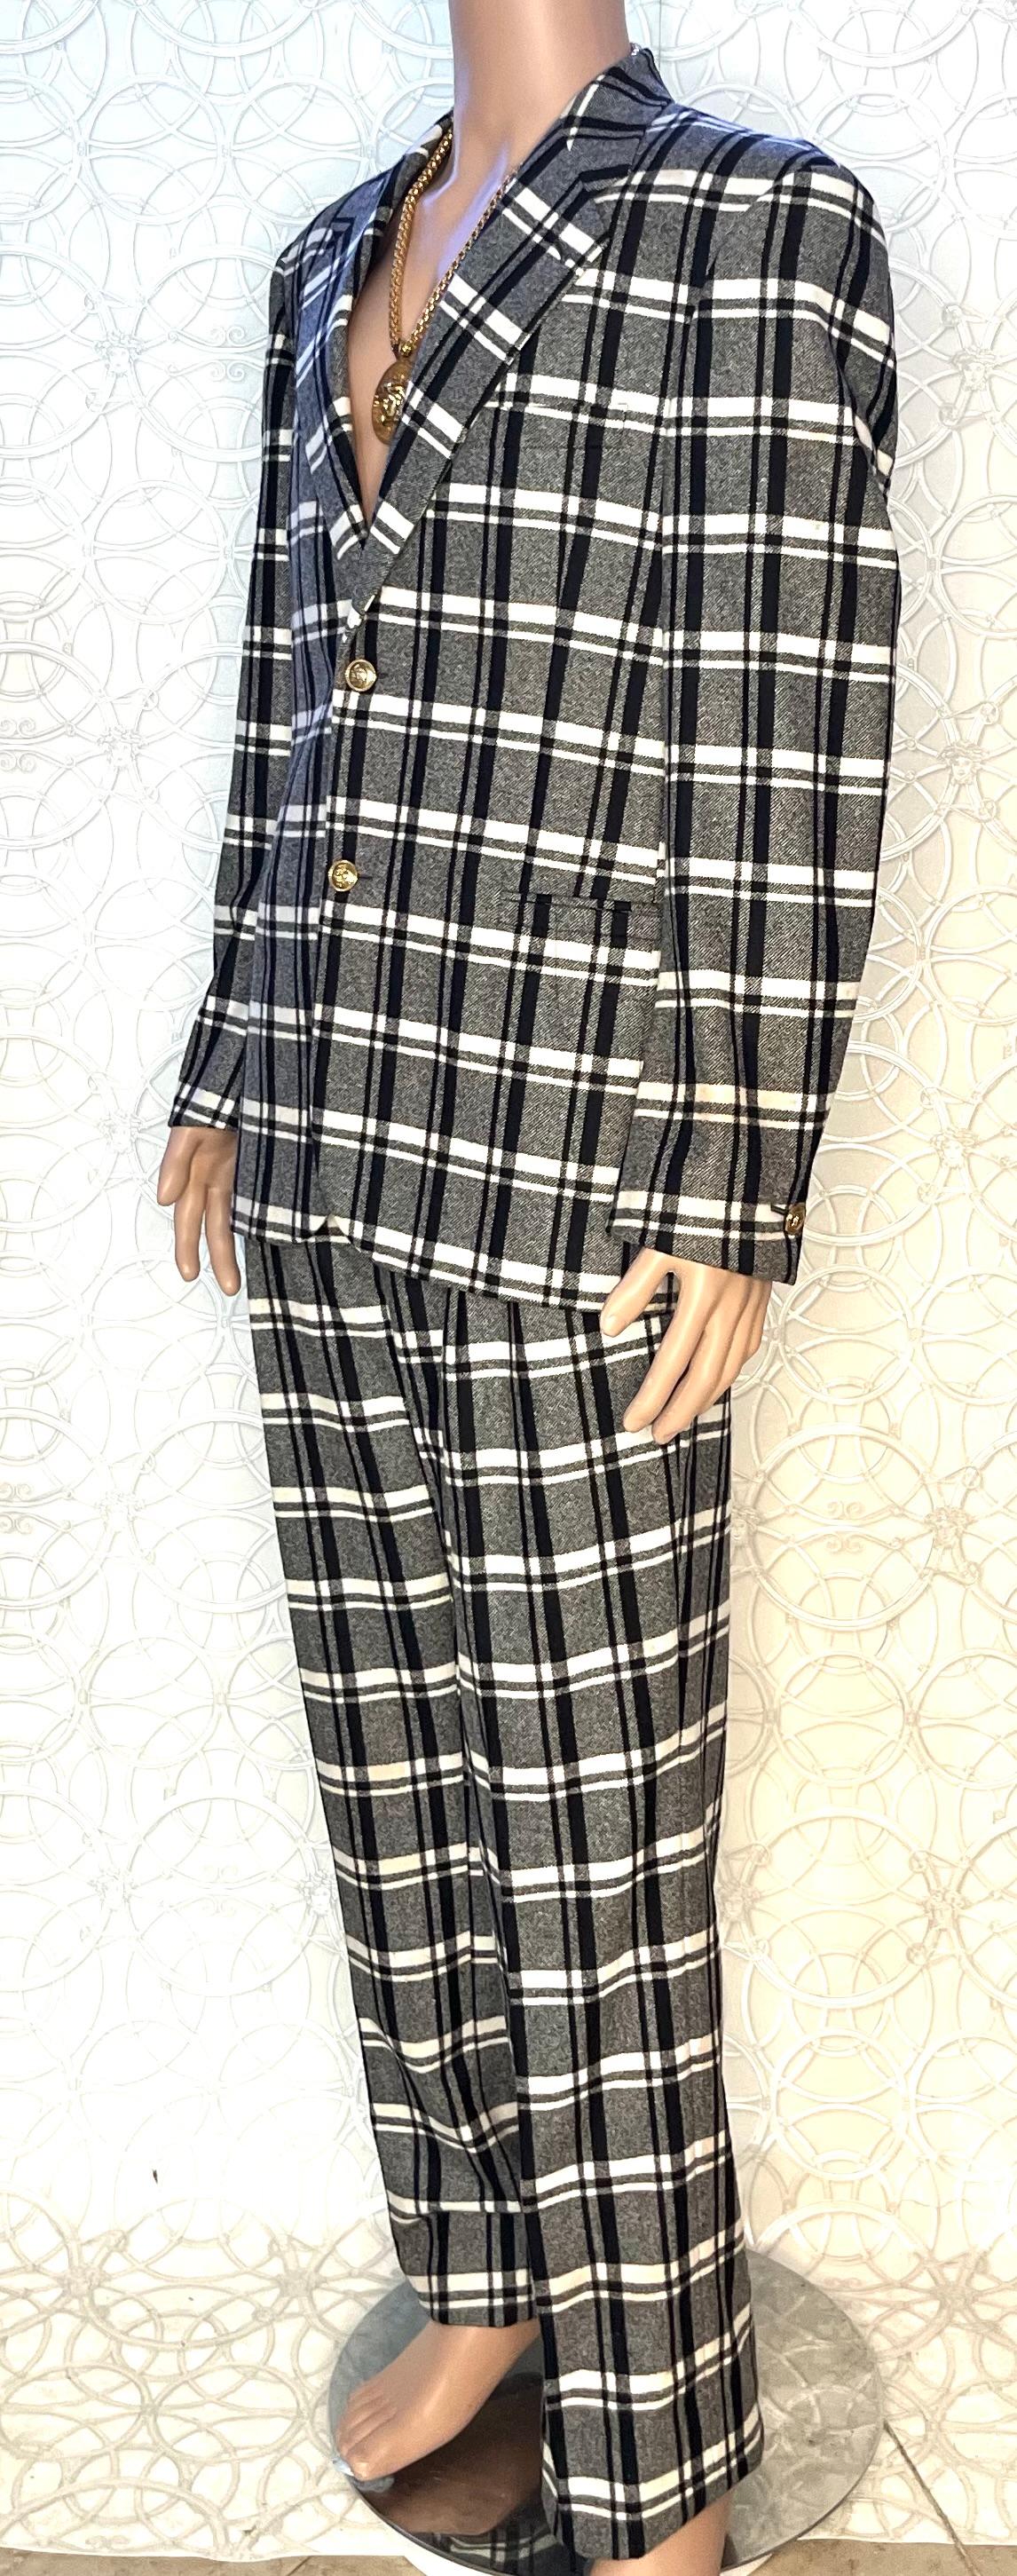 Men's F/W2013 look #2 BRAND NEW VERSACE CHECKERED 100% WOOL SUIT 50 - 40 (L) For Sale